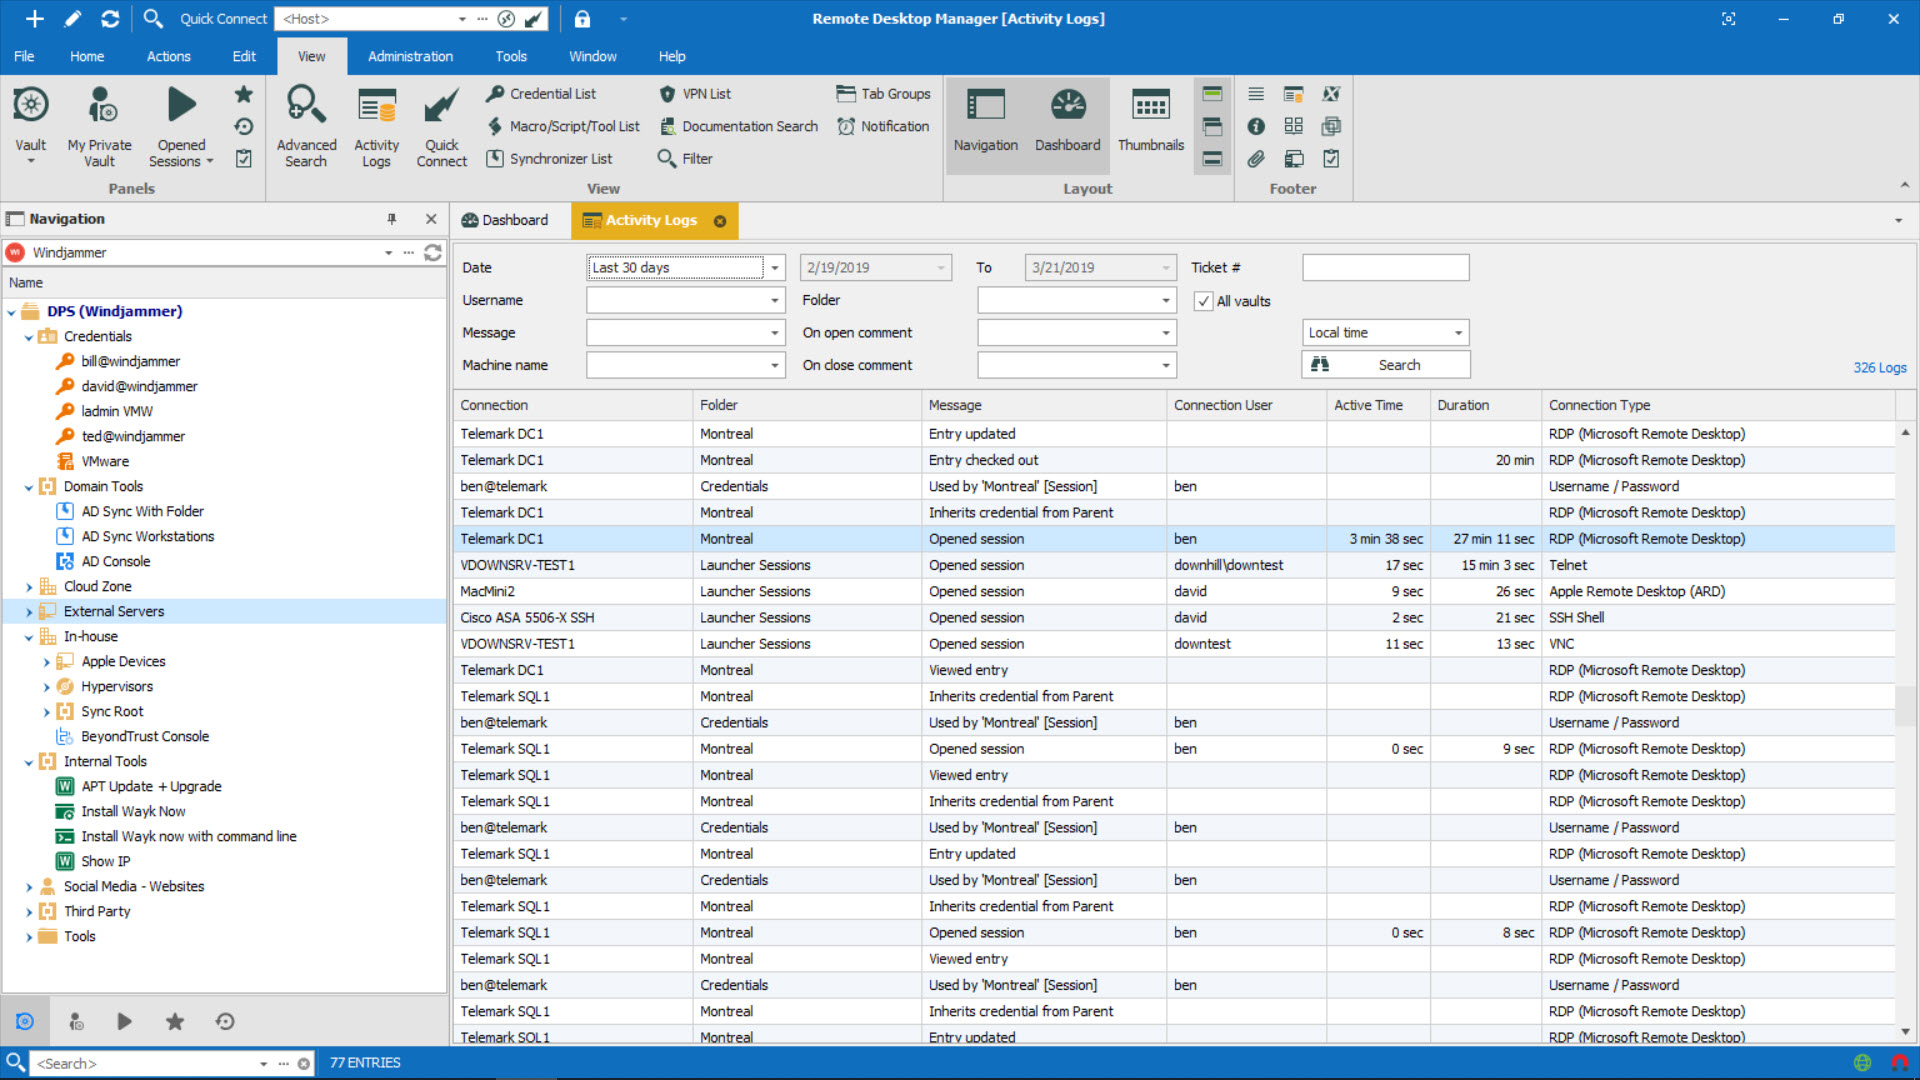 Audit Activity with Customizable Reports and Logs - Remote Desktop Manager